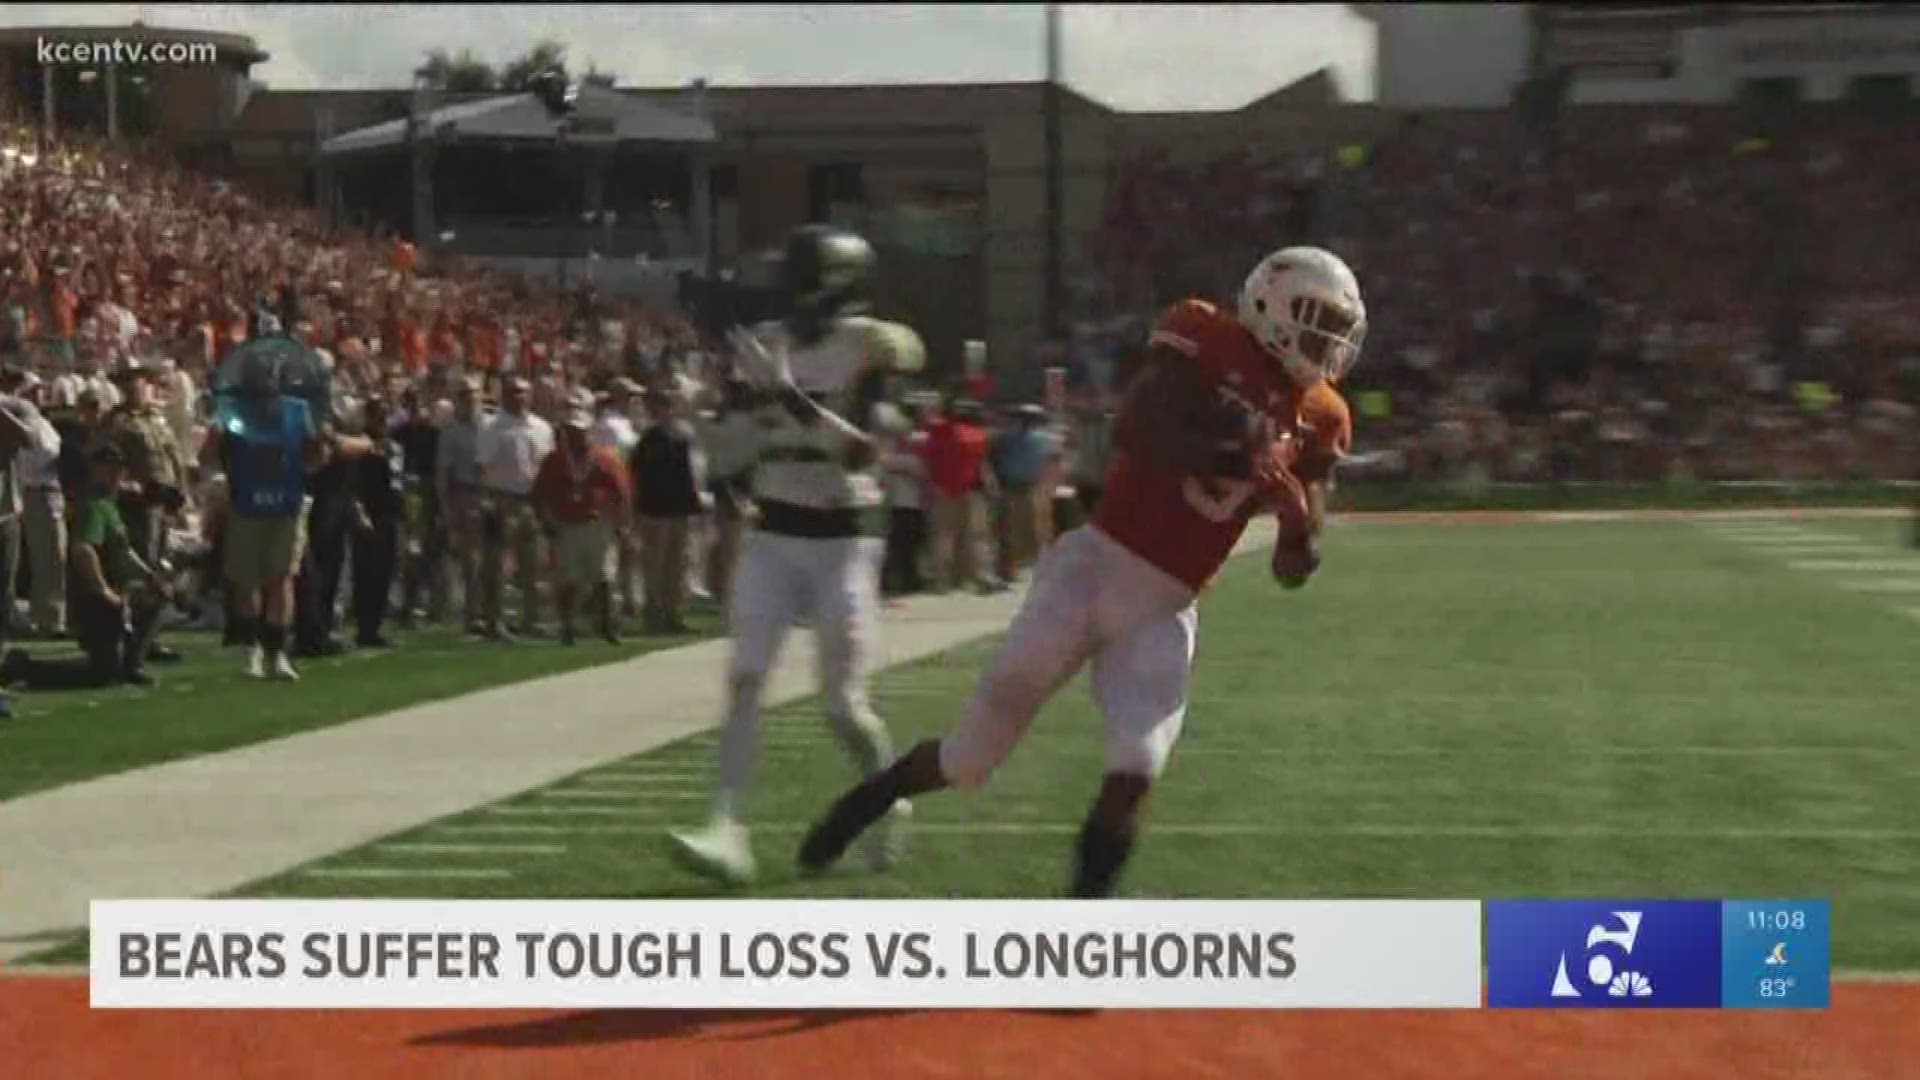 The Bears couldn't make up for their mistakes and fell to the Texas Longhorns.